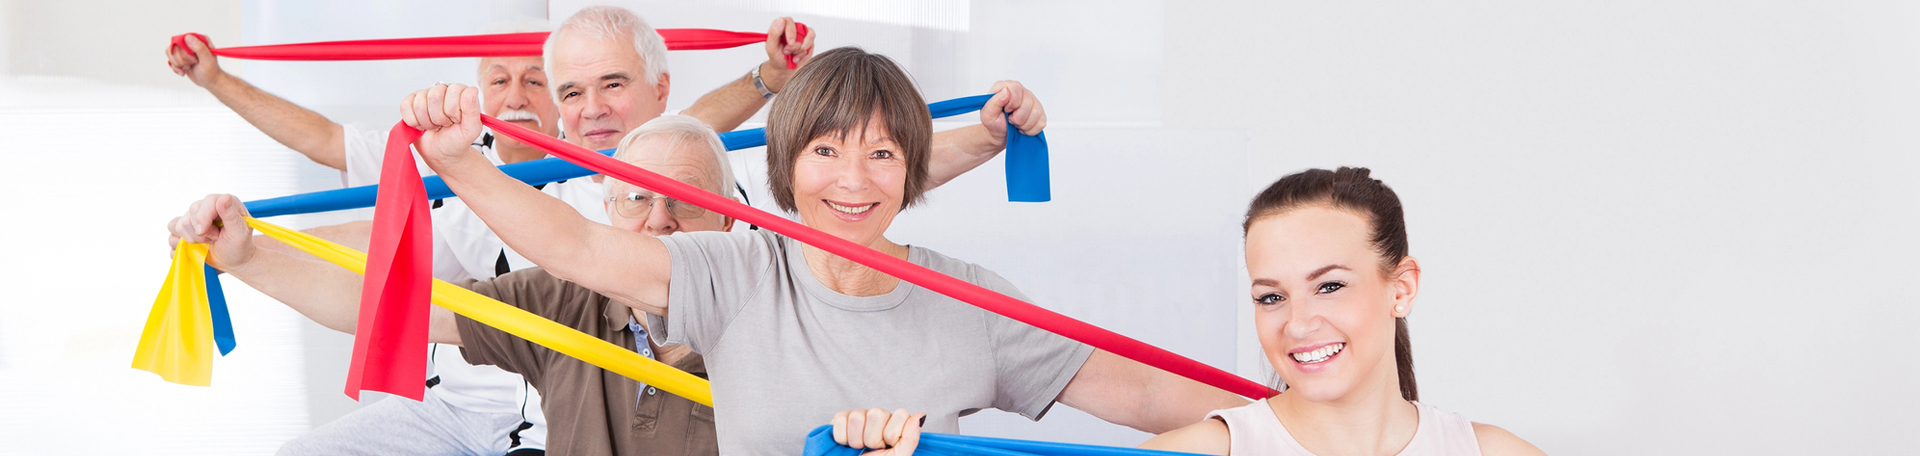 Augusta chiropractic care and exercise of all sorts help reduce chronic pain and distress